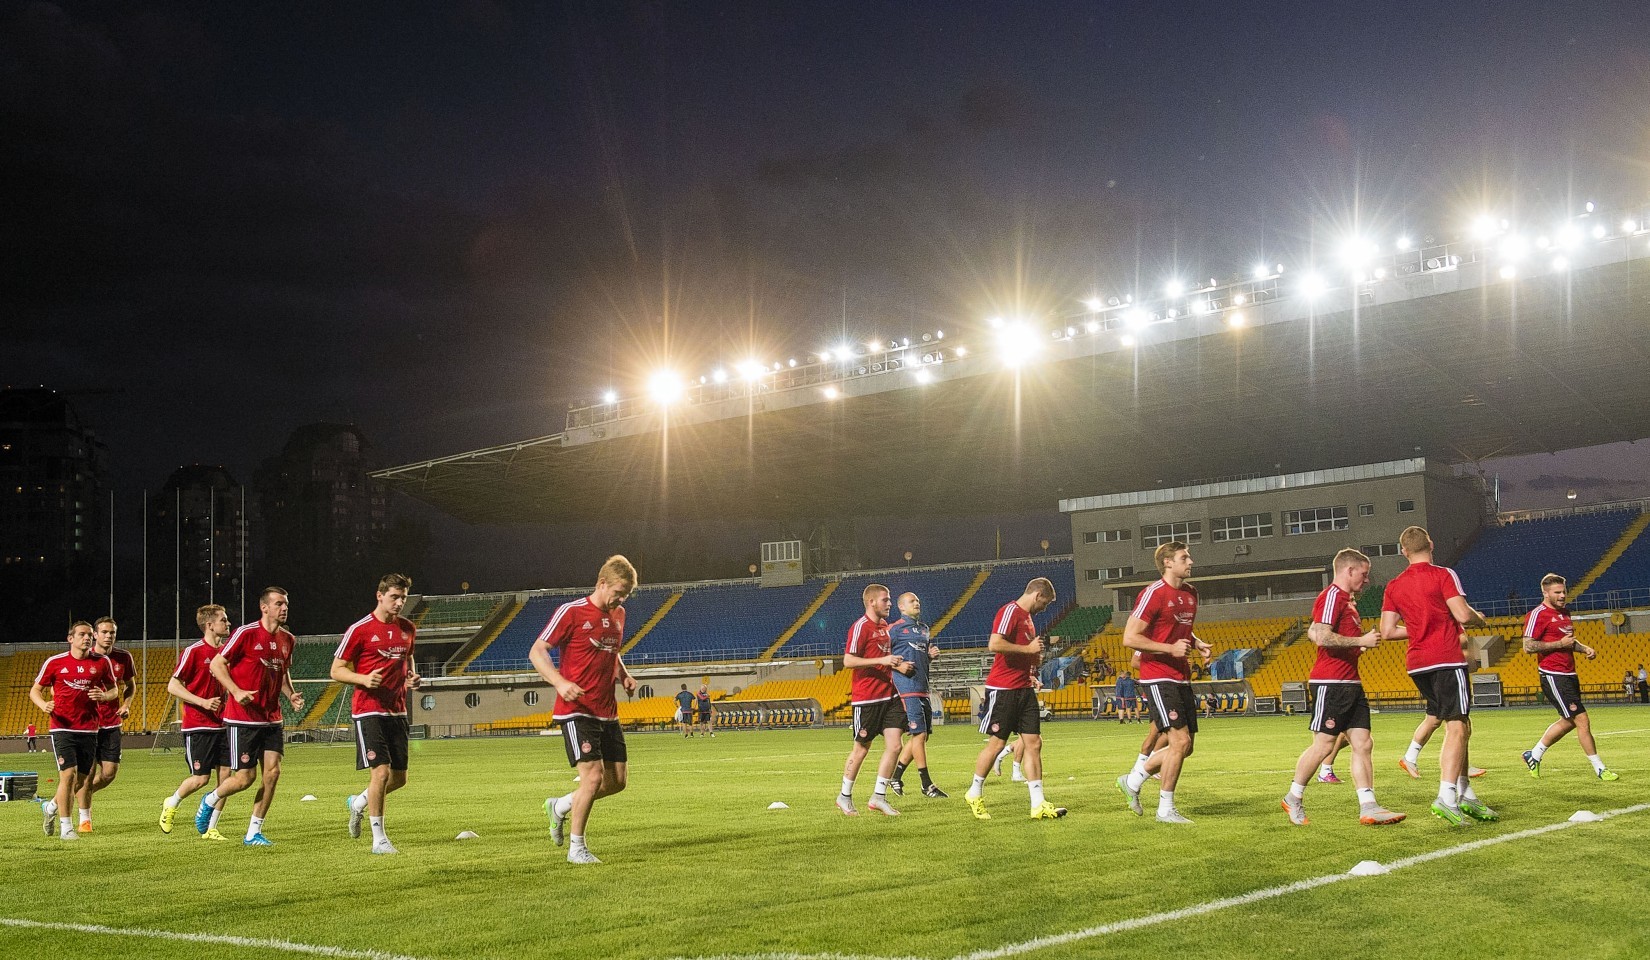 The Dons train in Central Stadium, Kazakhstan